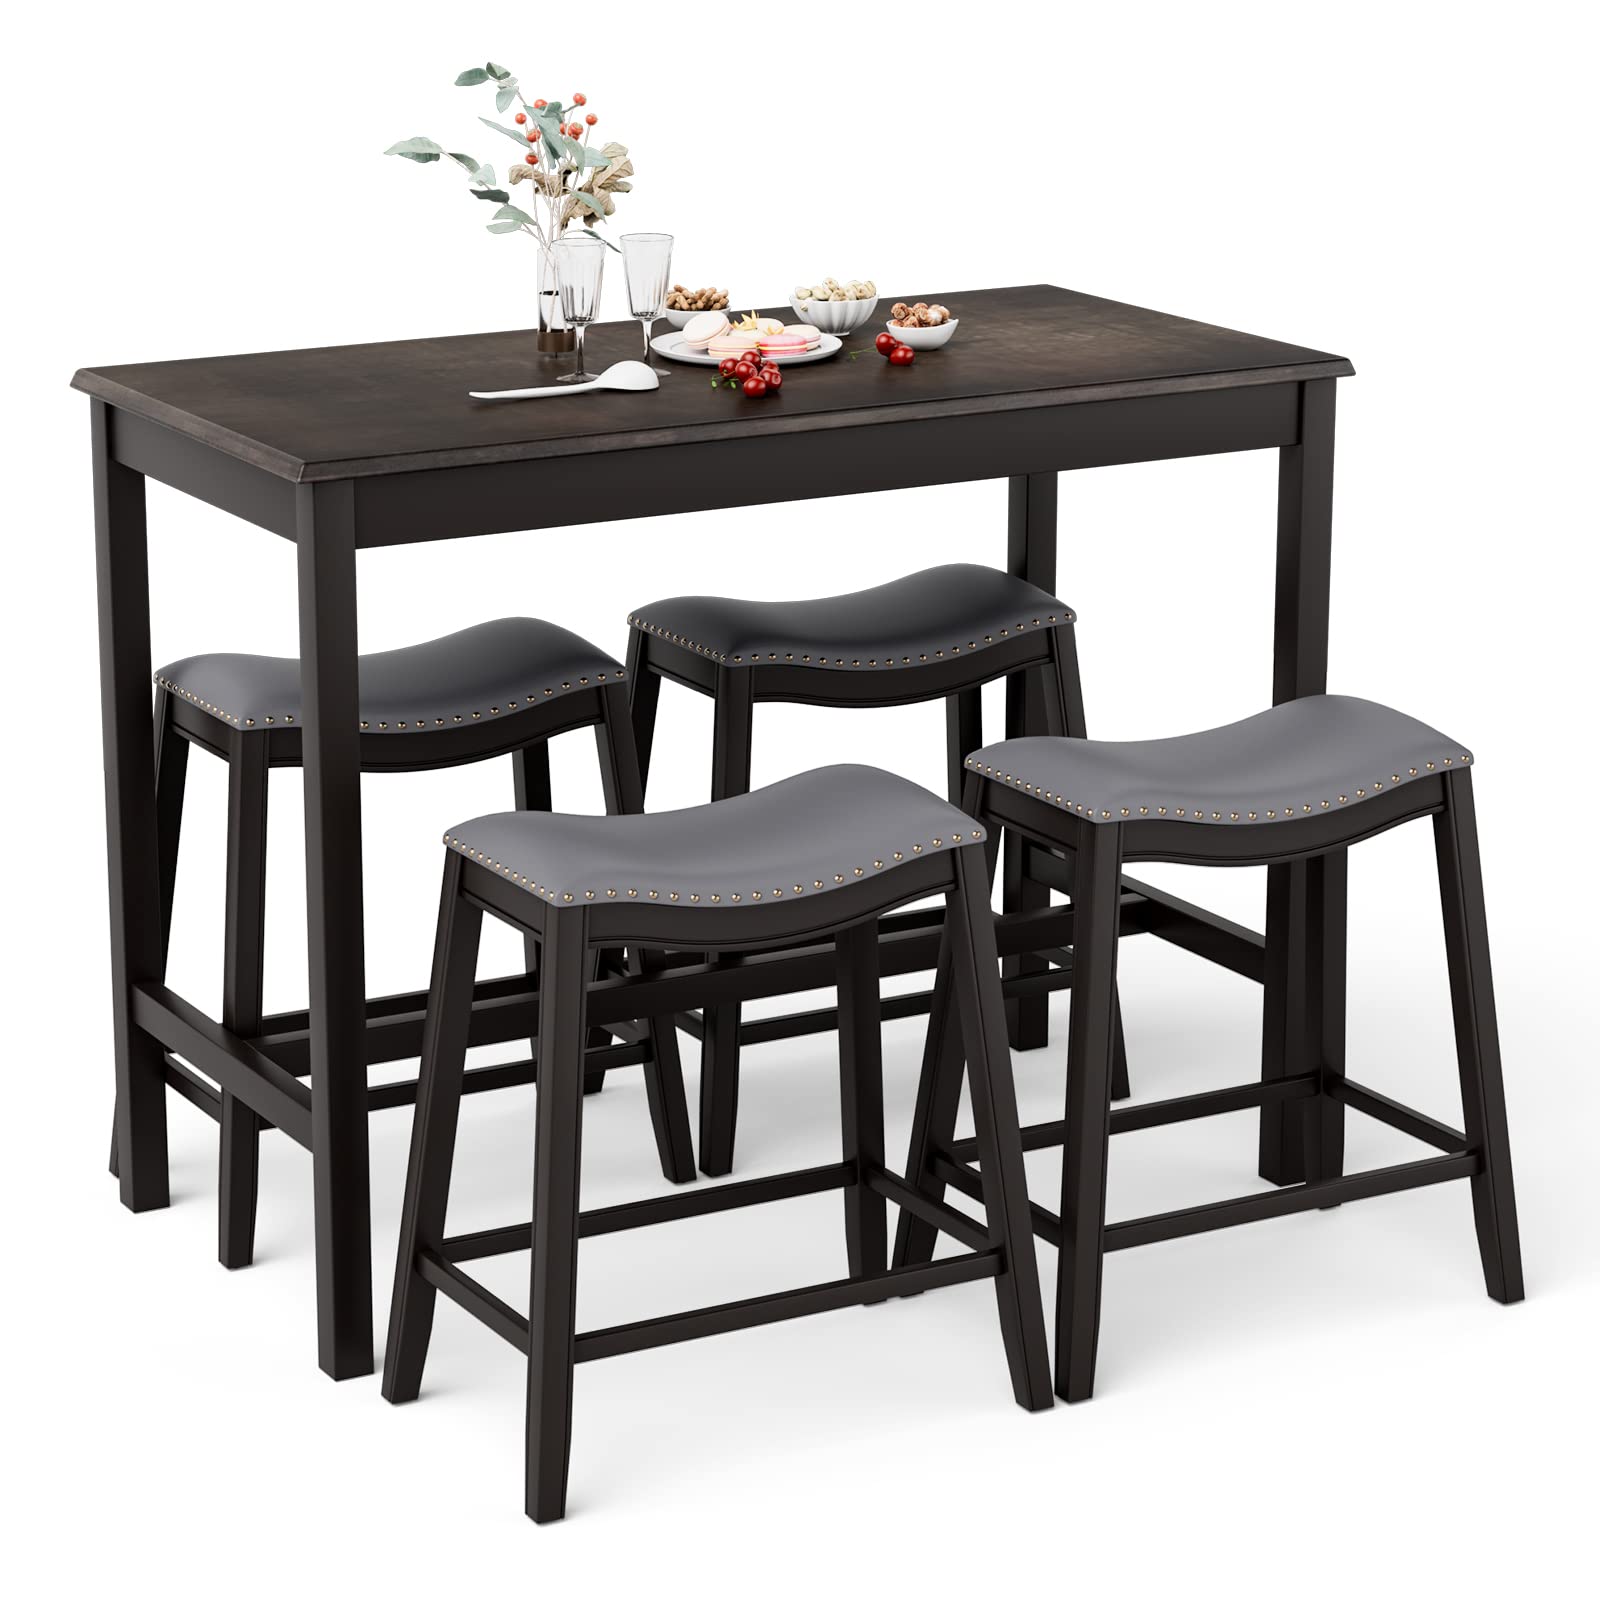 Giantex Dining Table Set for 4, Kitchen Counter Height Table w/ 4 Stools (Black)